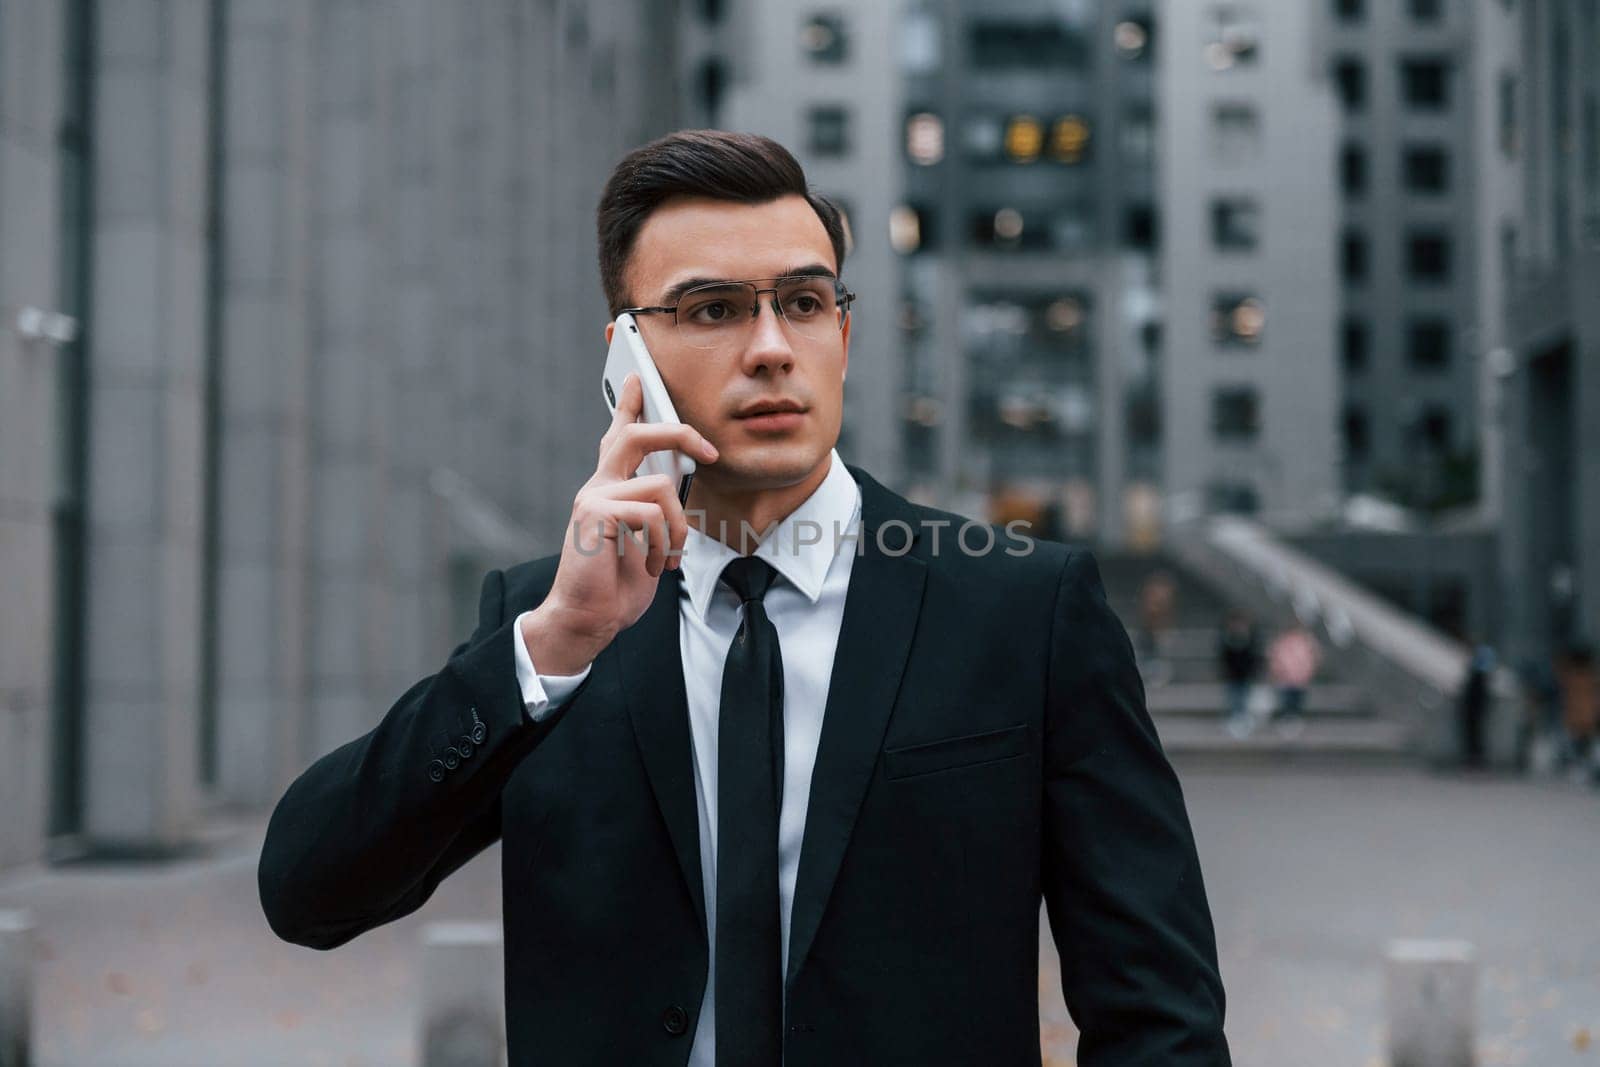 Portrait of businessman that is in black suit and tie is outdoors in the city.